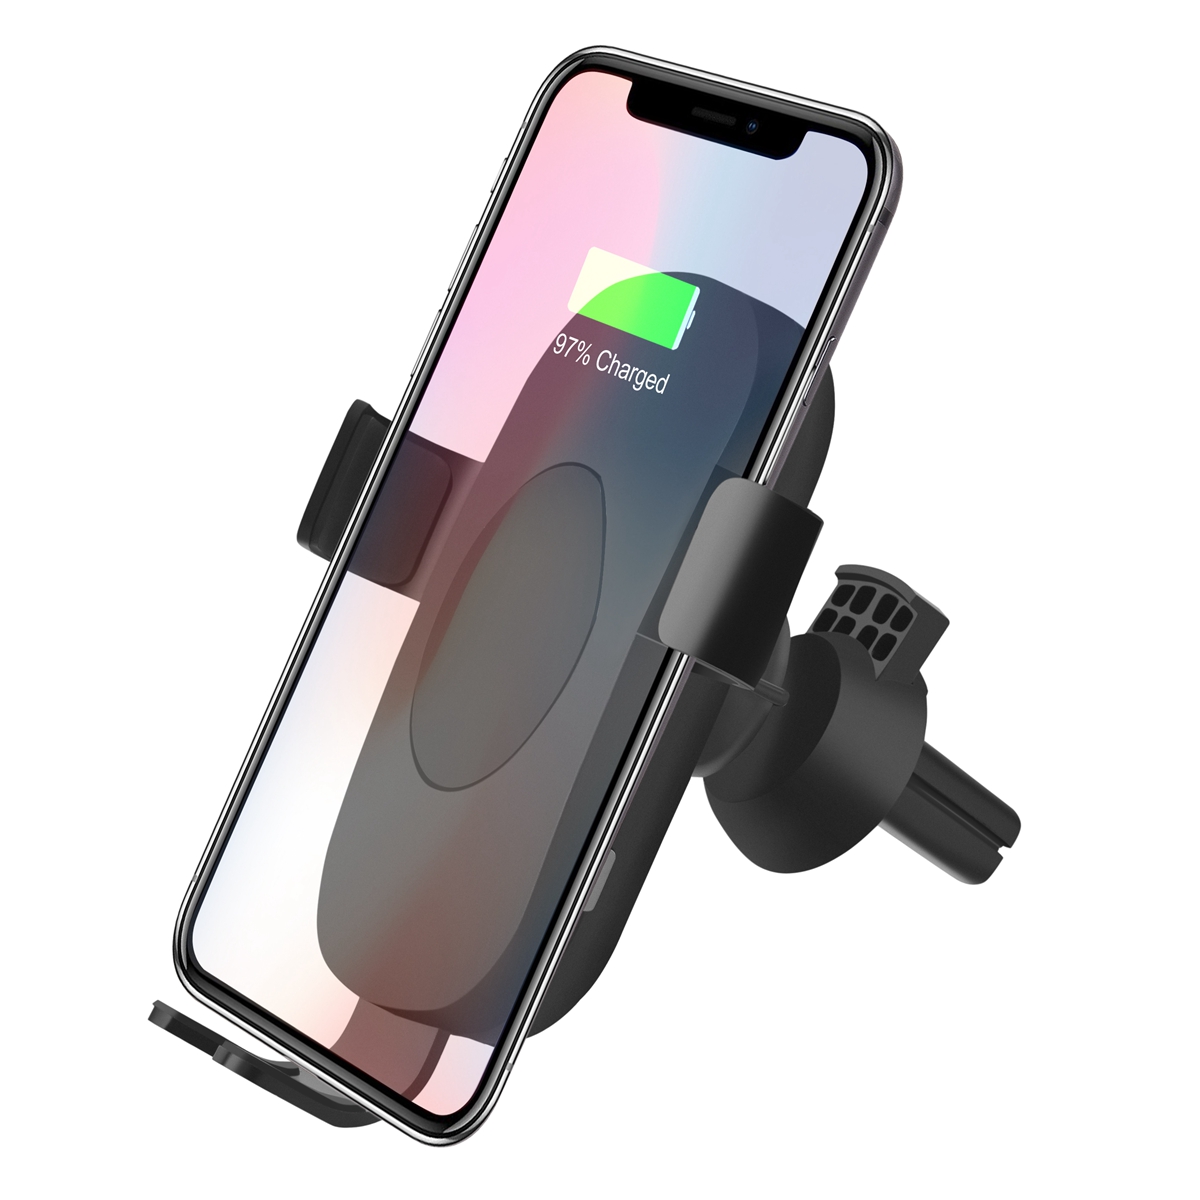 

Bakeey C8 10W 9V Fast Qi Wireless Charger Car Air Vent Mount for iPhone X 8 Plus S8 S9